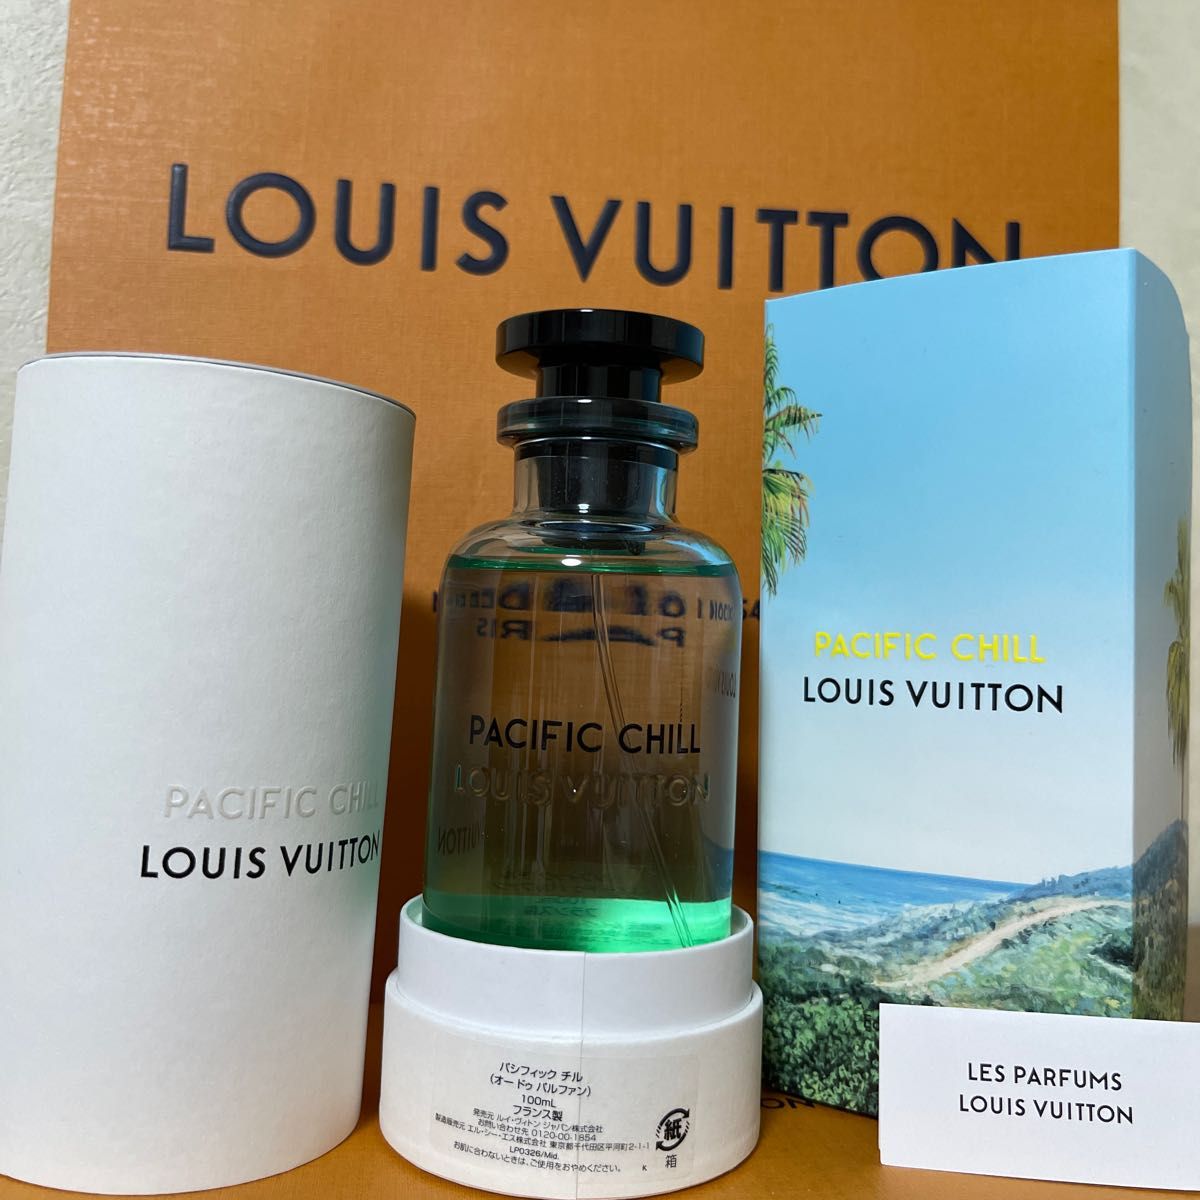 LOUIS VUITTON パシフィックチル ルイヴィトン香水｜PayPayフリマ